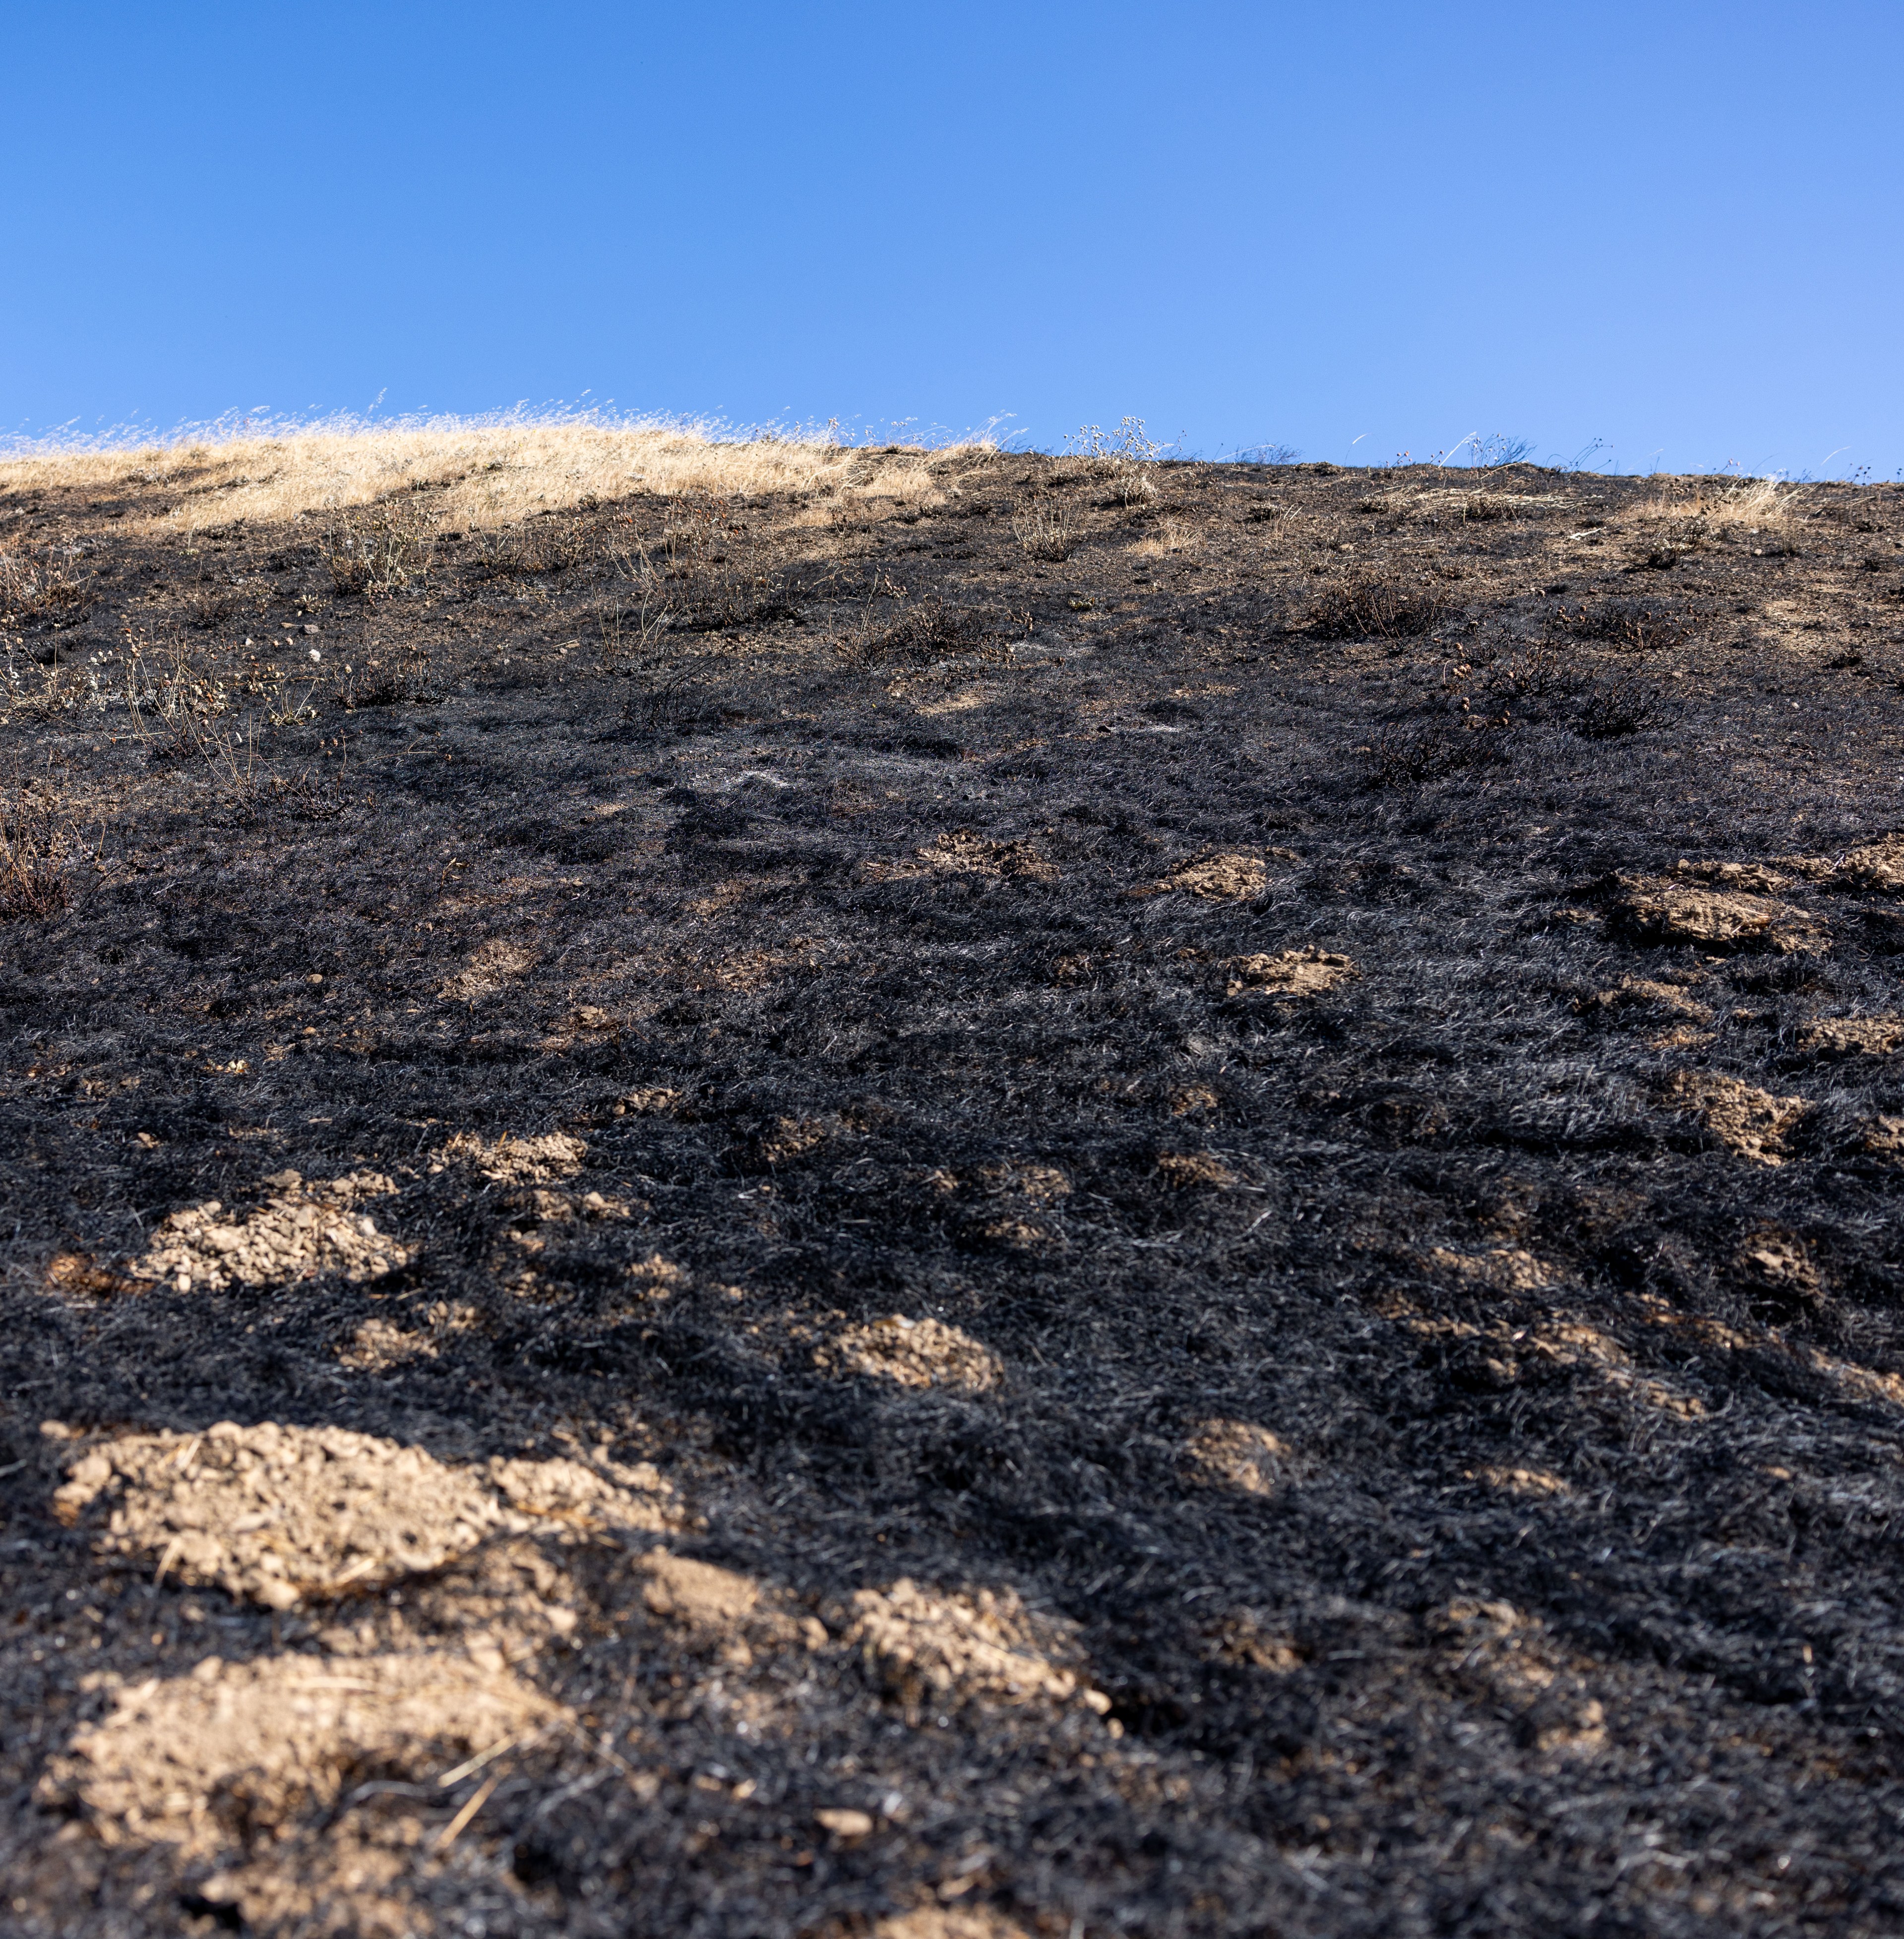 The image depicts a hillside with partially burnt grass, transitioning from charred black areas at the bottom to unburnt dry yellow grass at the top, under a clear blue sky.